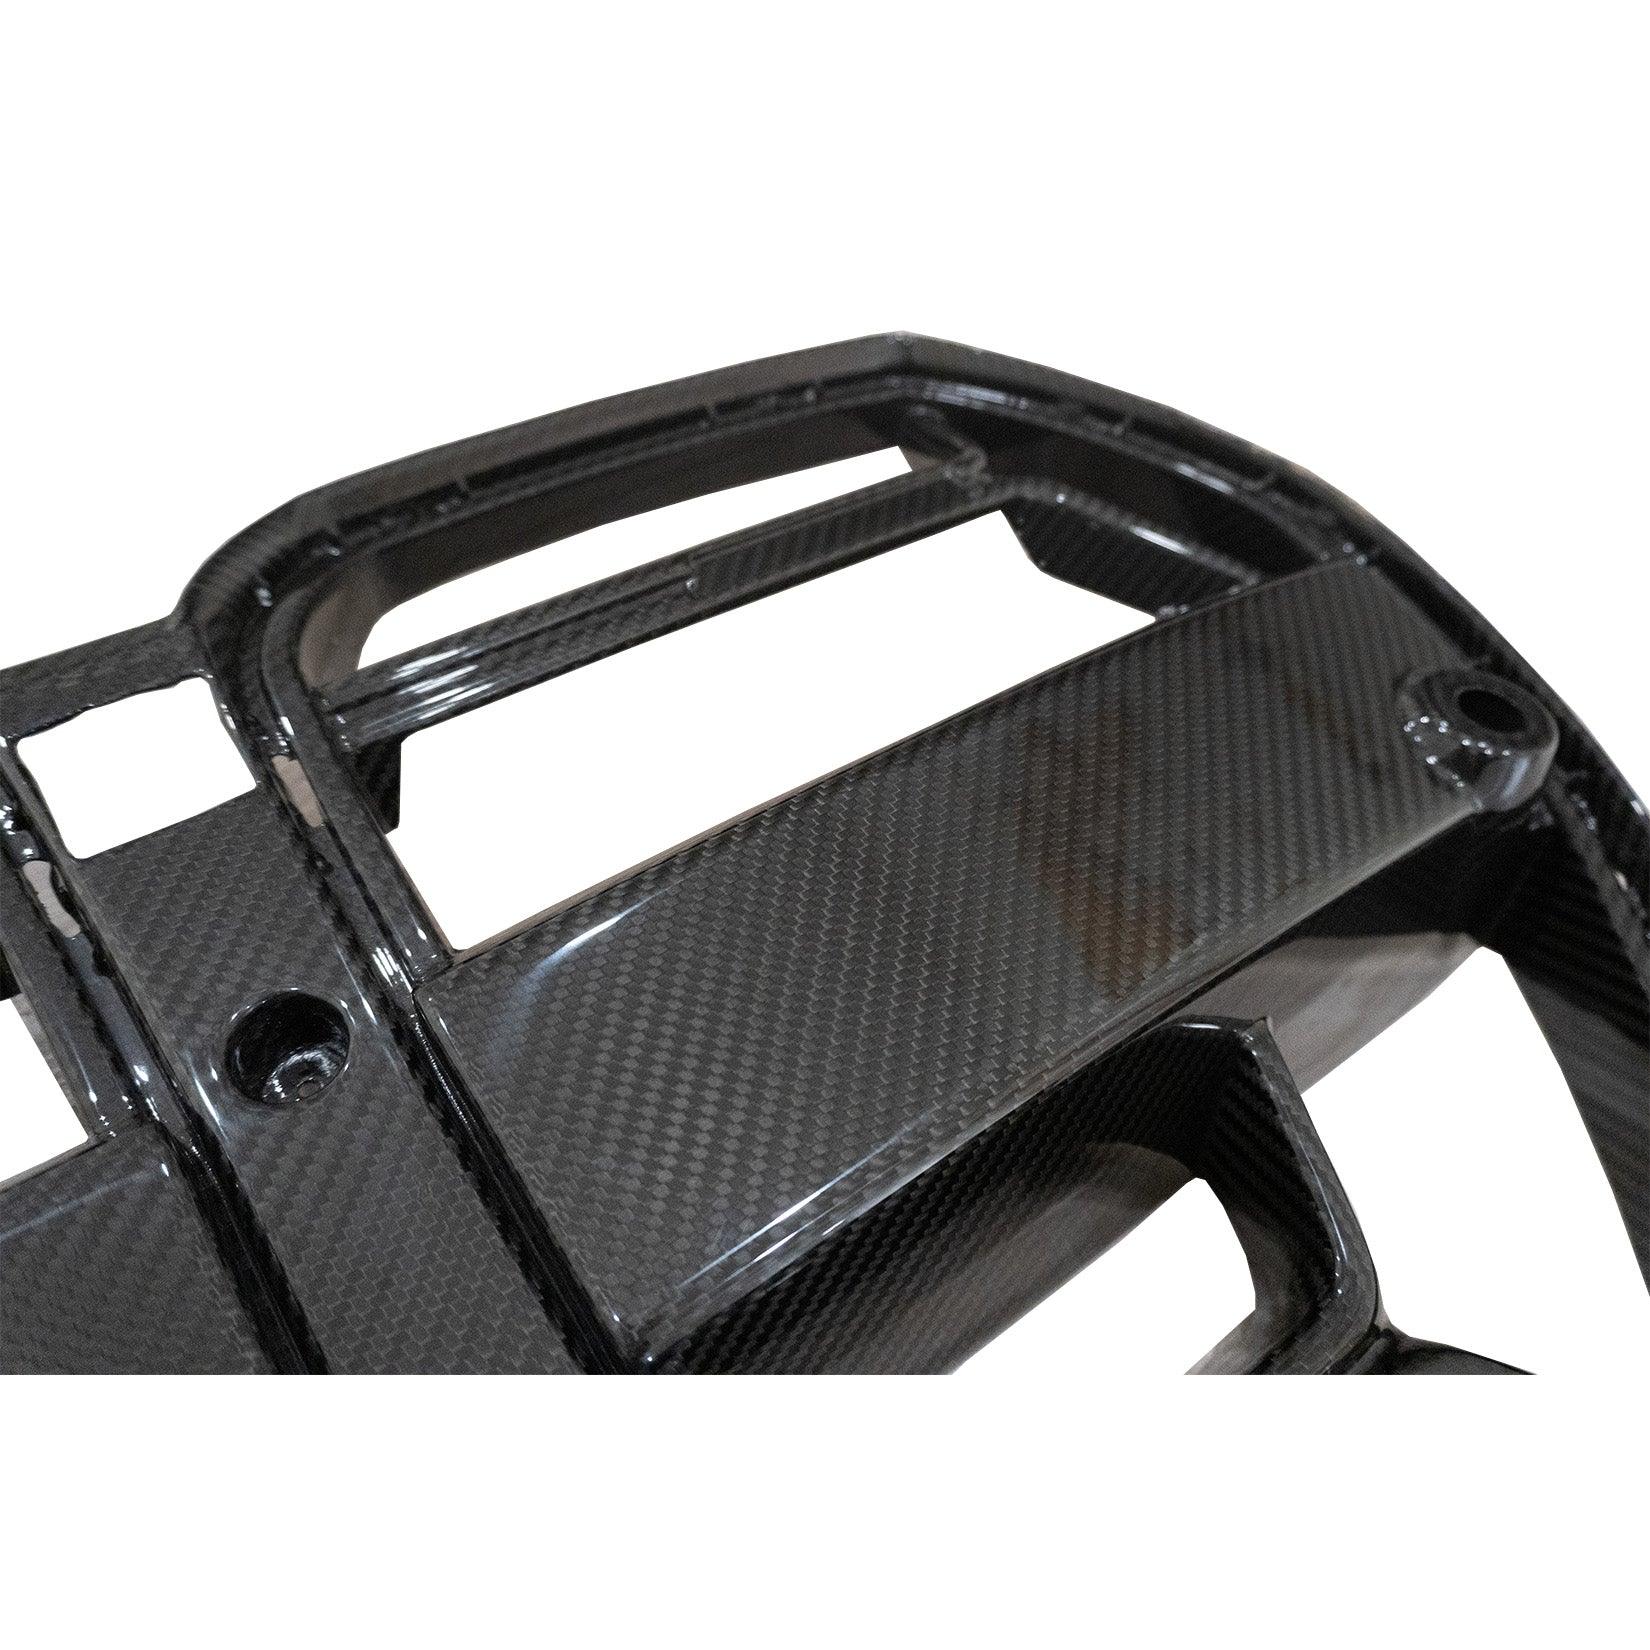 BMW G80/G81 M3 // G82/G83 M4 CSL Dry Carbon Fiber Front Kidney Grill - With  or Without ACC – RisperStyling